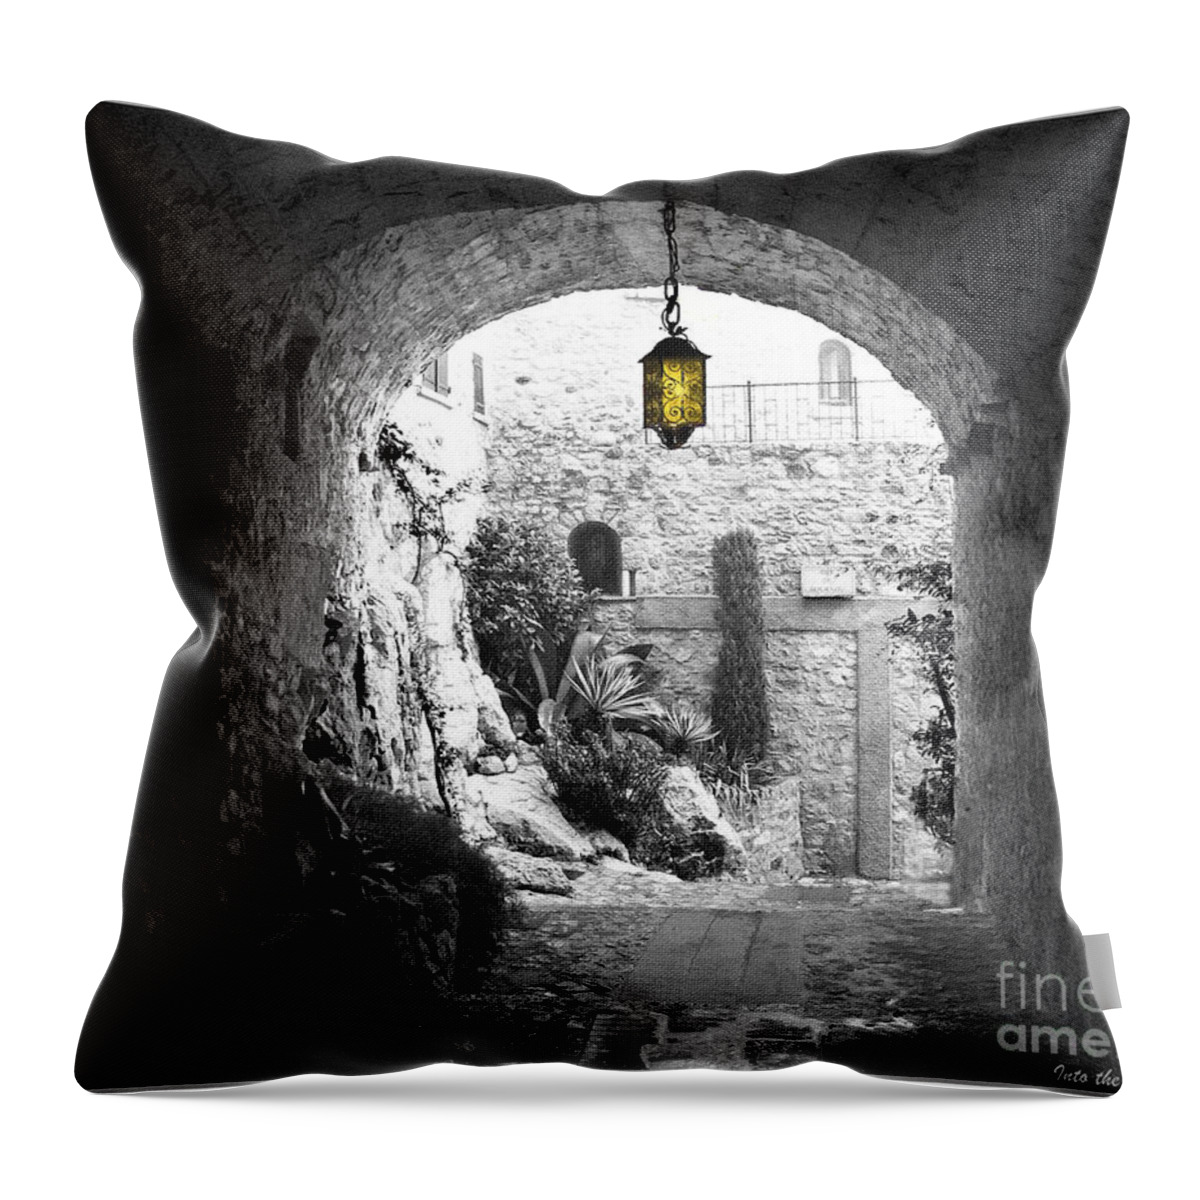 Into The Light Throw Pillow featuring the photograph Into The Light 2 by Victoria Harrington